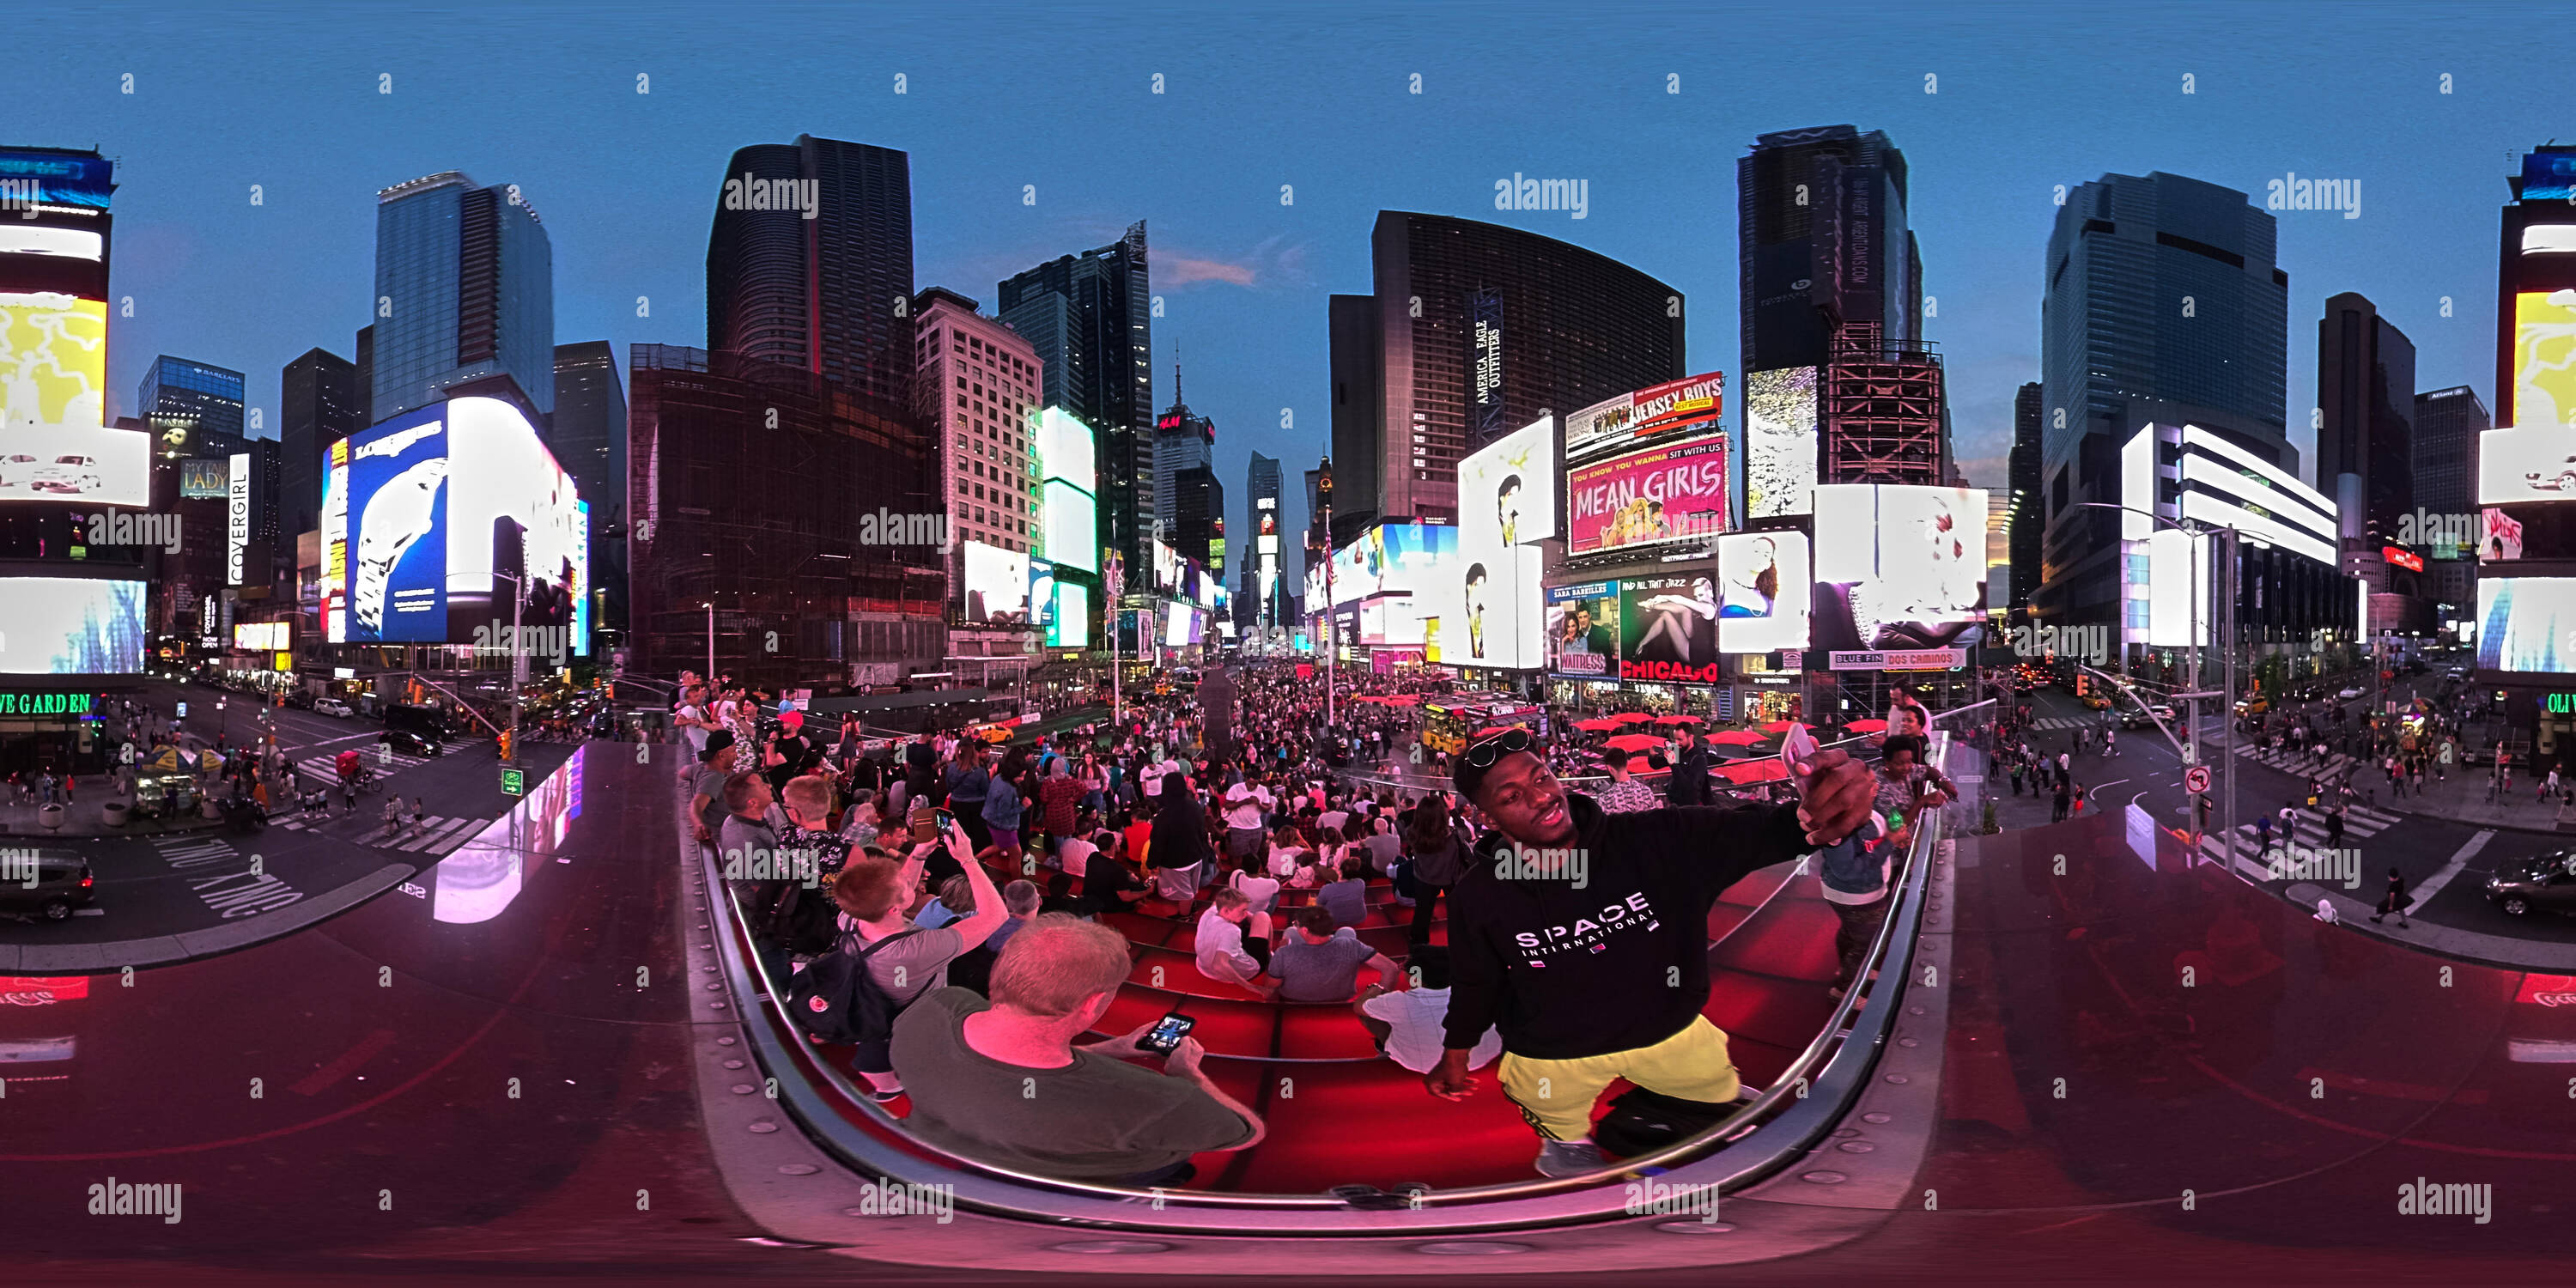 360 degree panoramic view of 360 panorama of Times Square New York at dusk with tourist taking selfies centre frame.